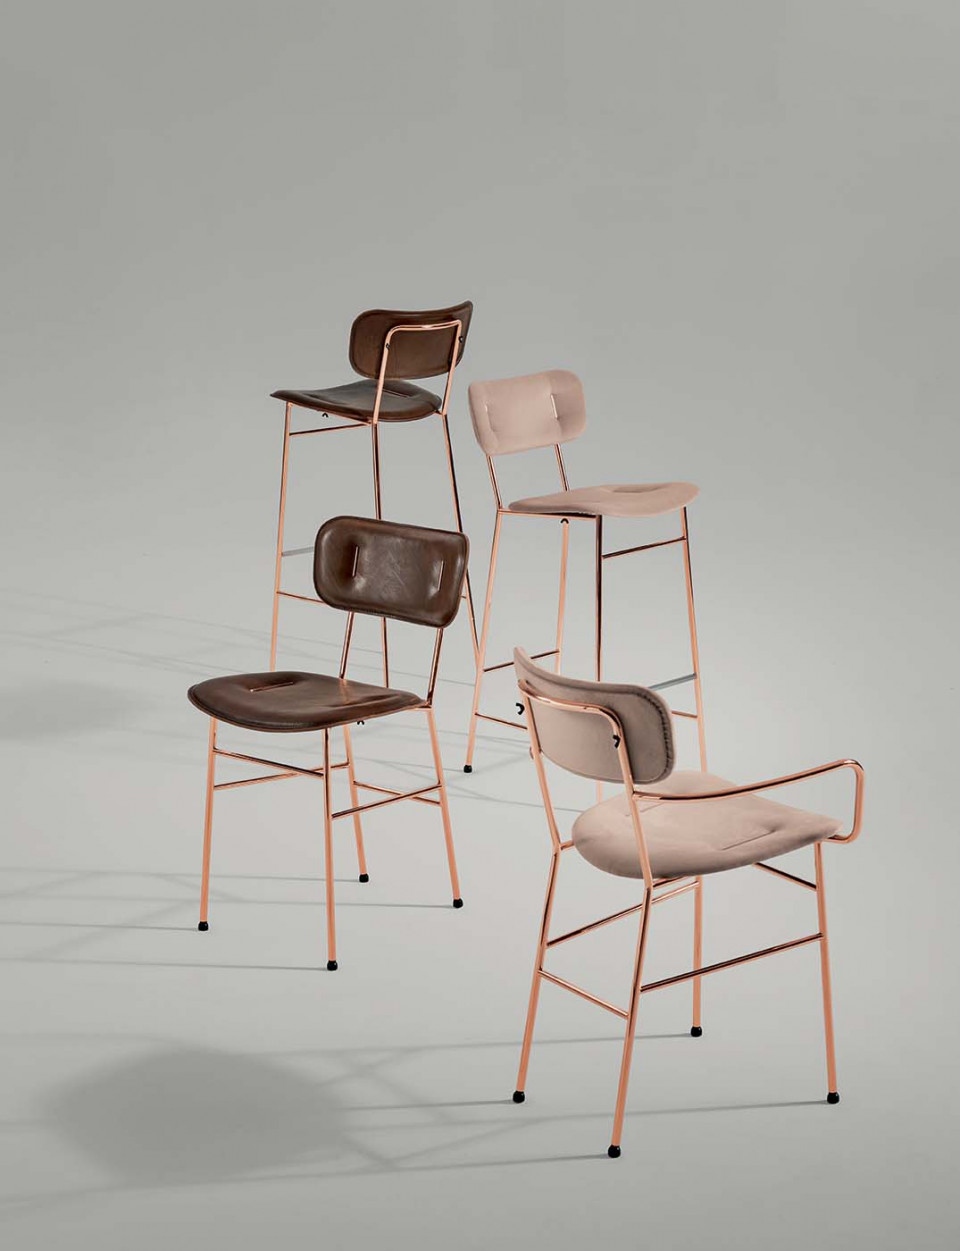 Piuma chair with armrests in pink fabric